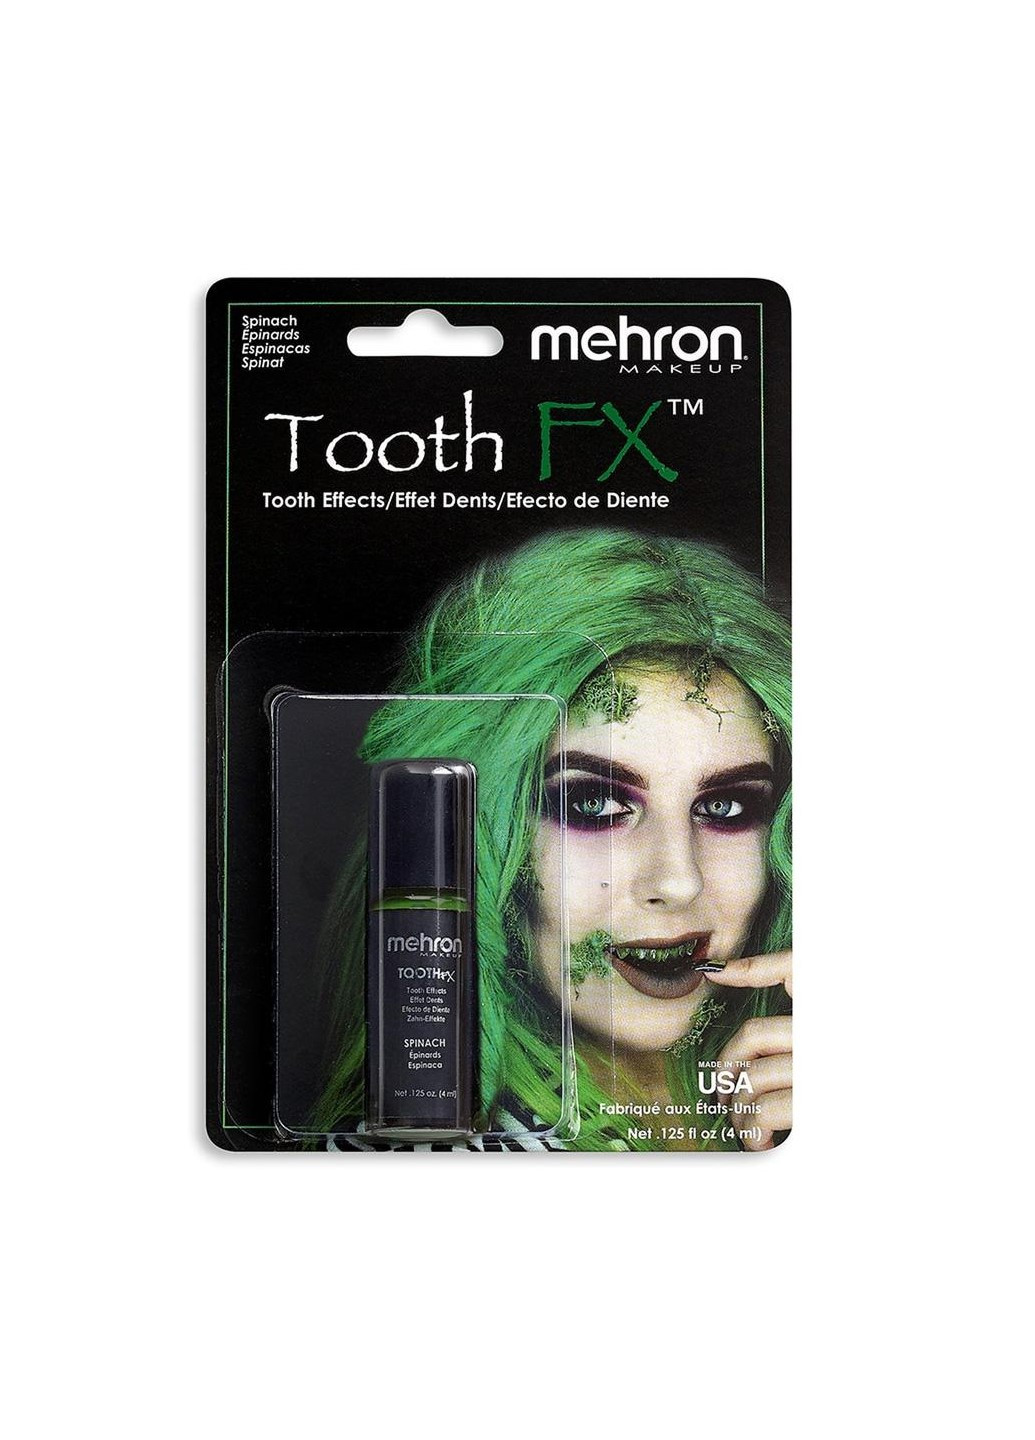 Фарба для зубів Tooth FX with Brush for Special Effects - Spinach (Шпинат), 4 мл Mehron (205593138)